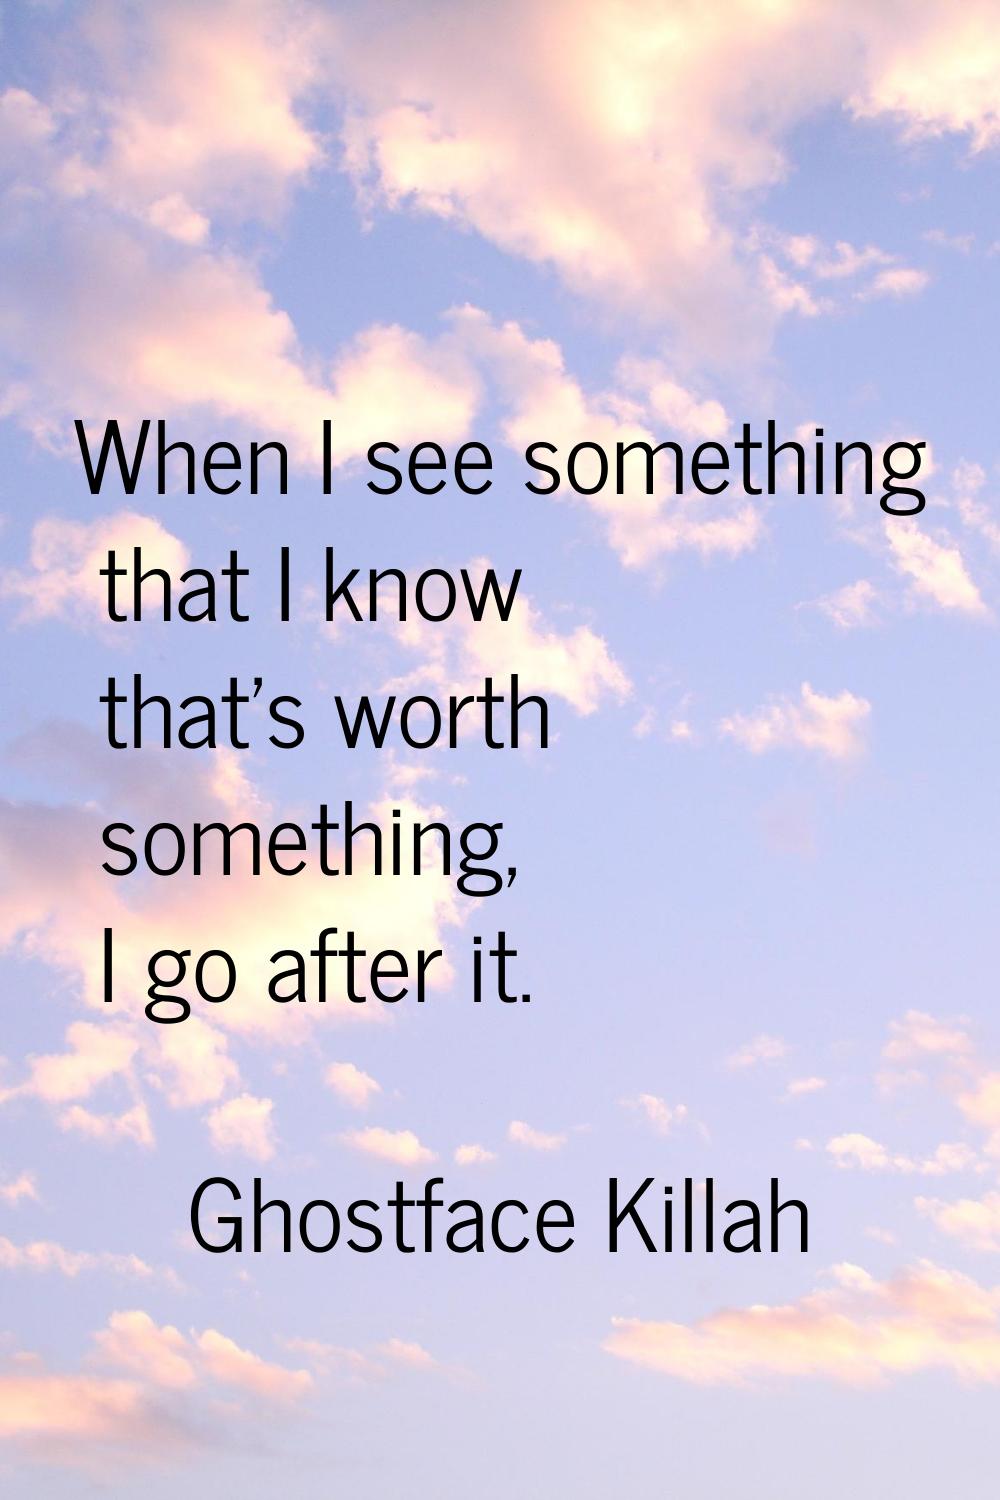 When I see something that I know that's worth something, I go after it.